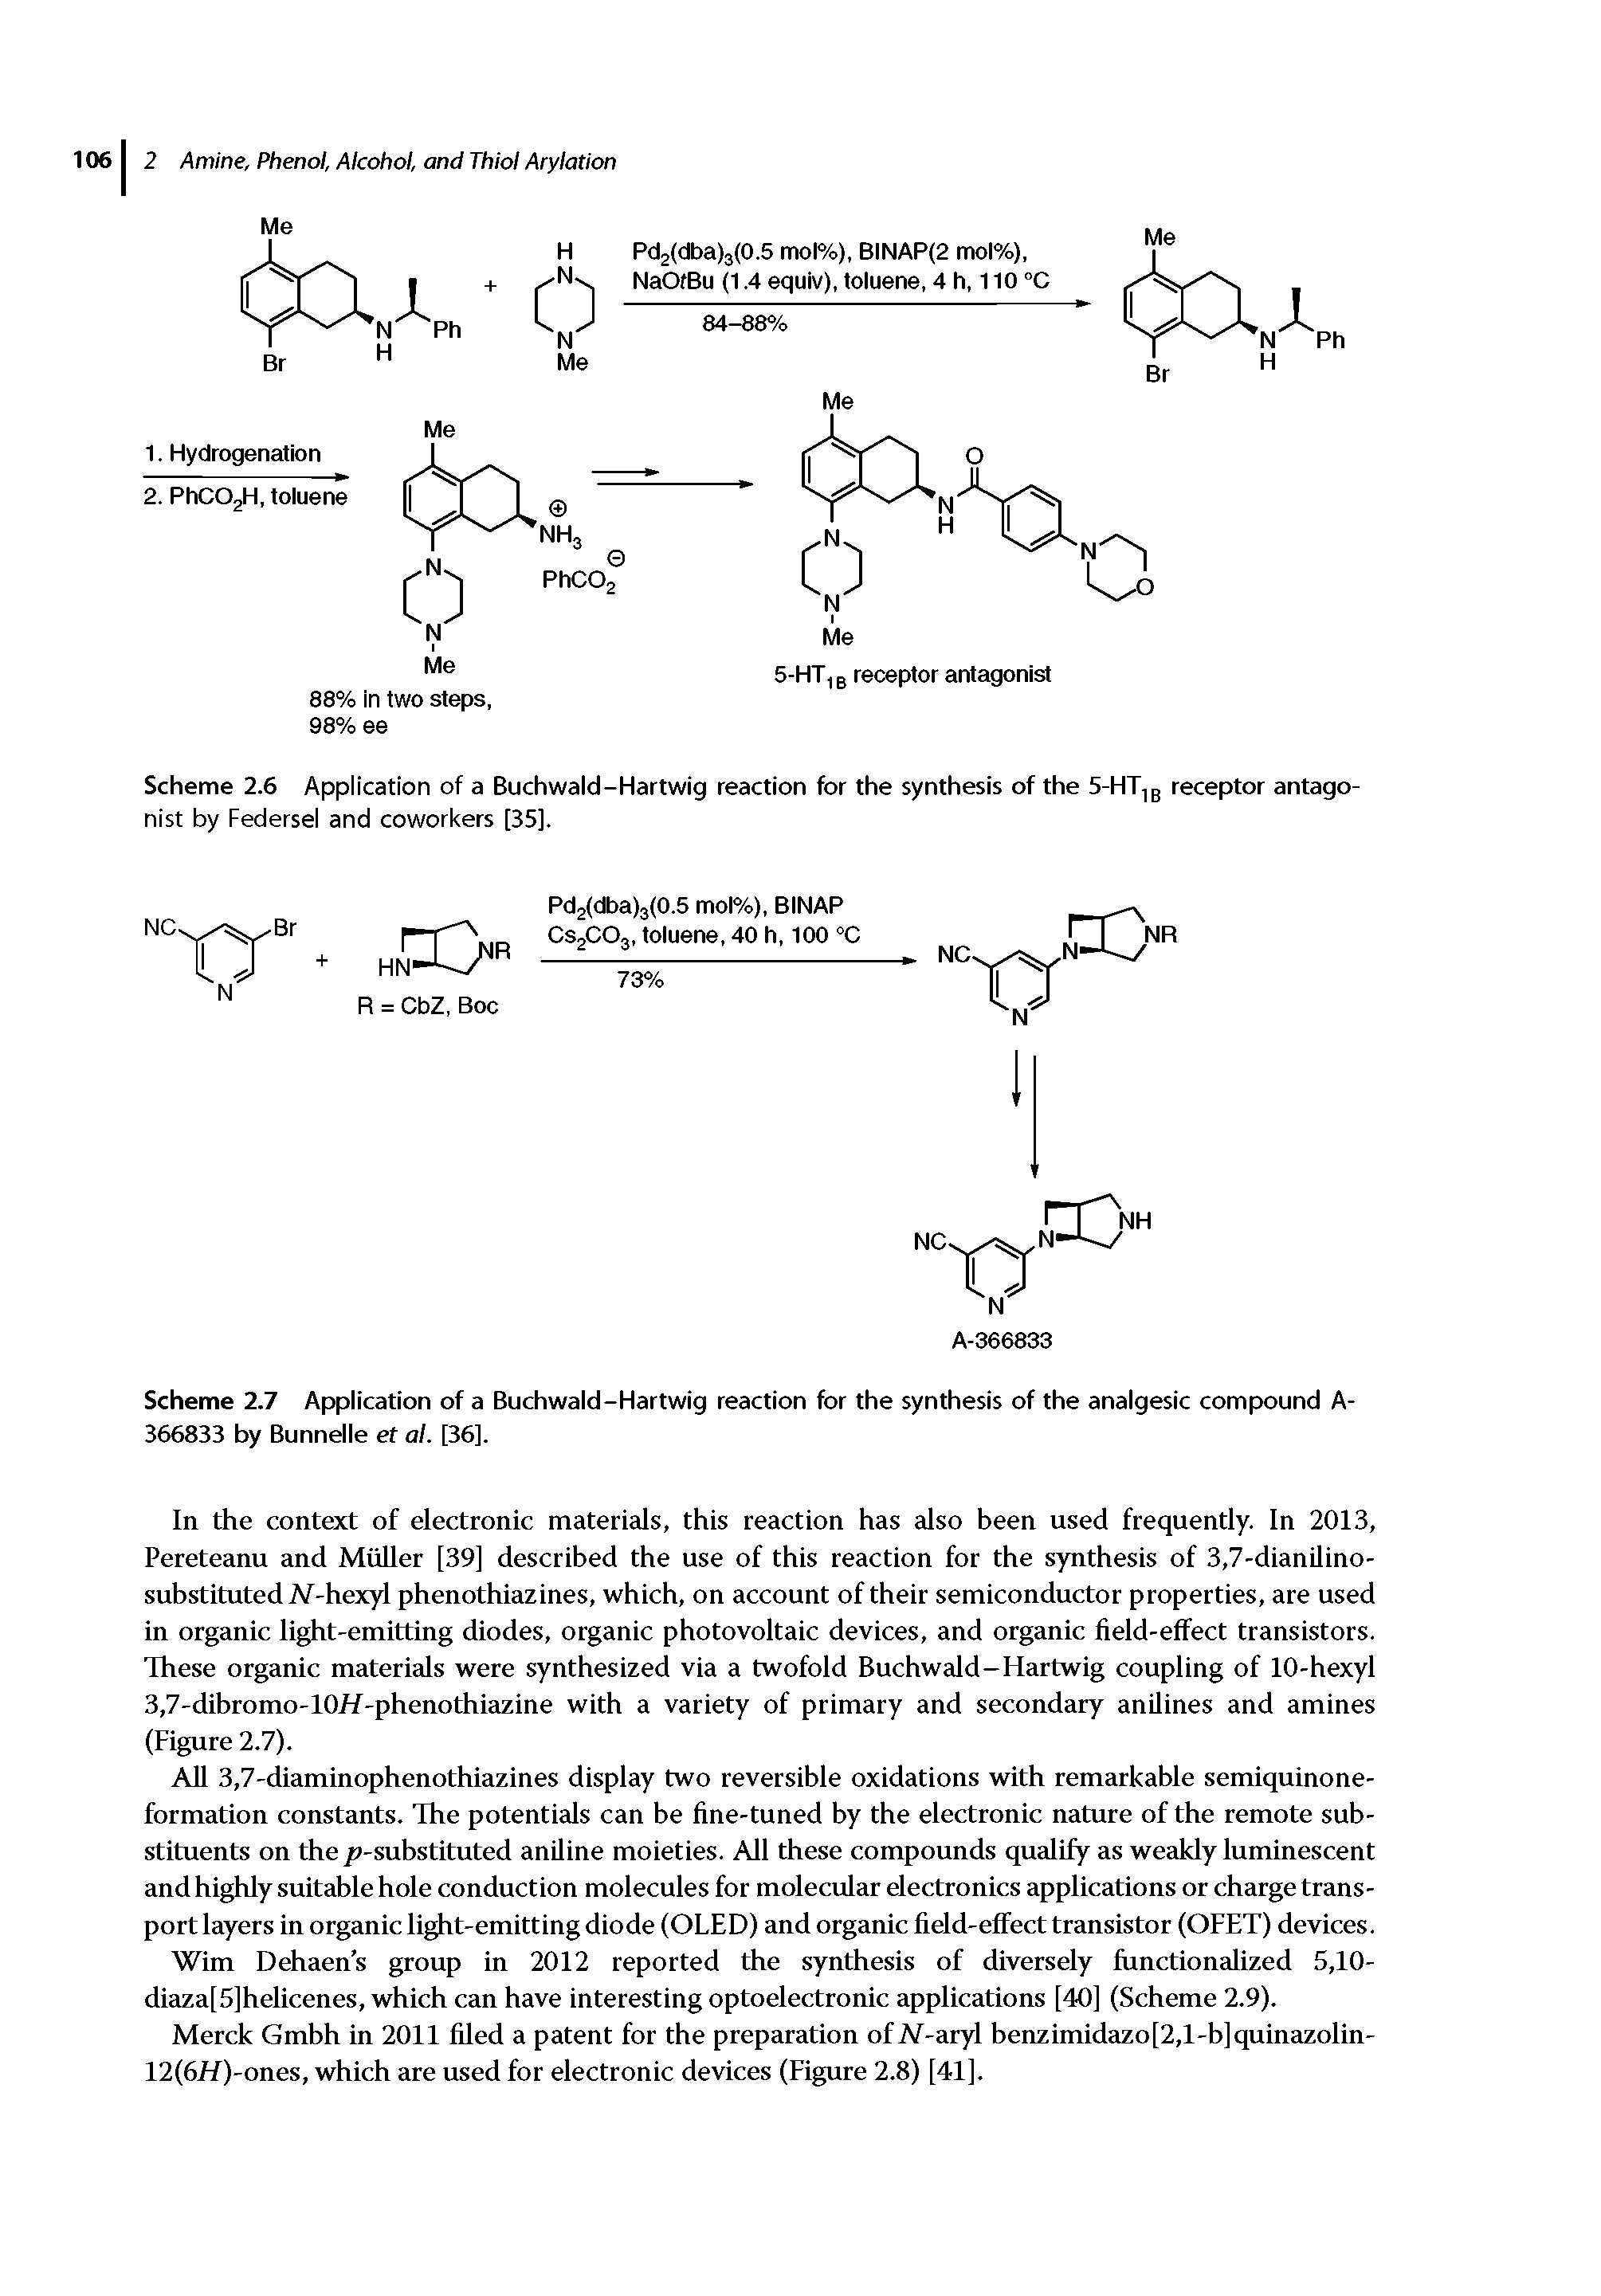 Scheme 2.6 Application of a Buchwald-Hartwig reaction for the synthesis of the 5-HT,g receptor antagonist by Federsel and coworkers [35].